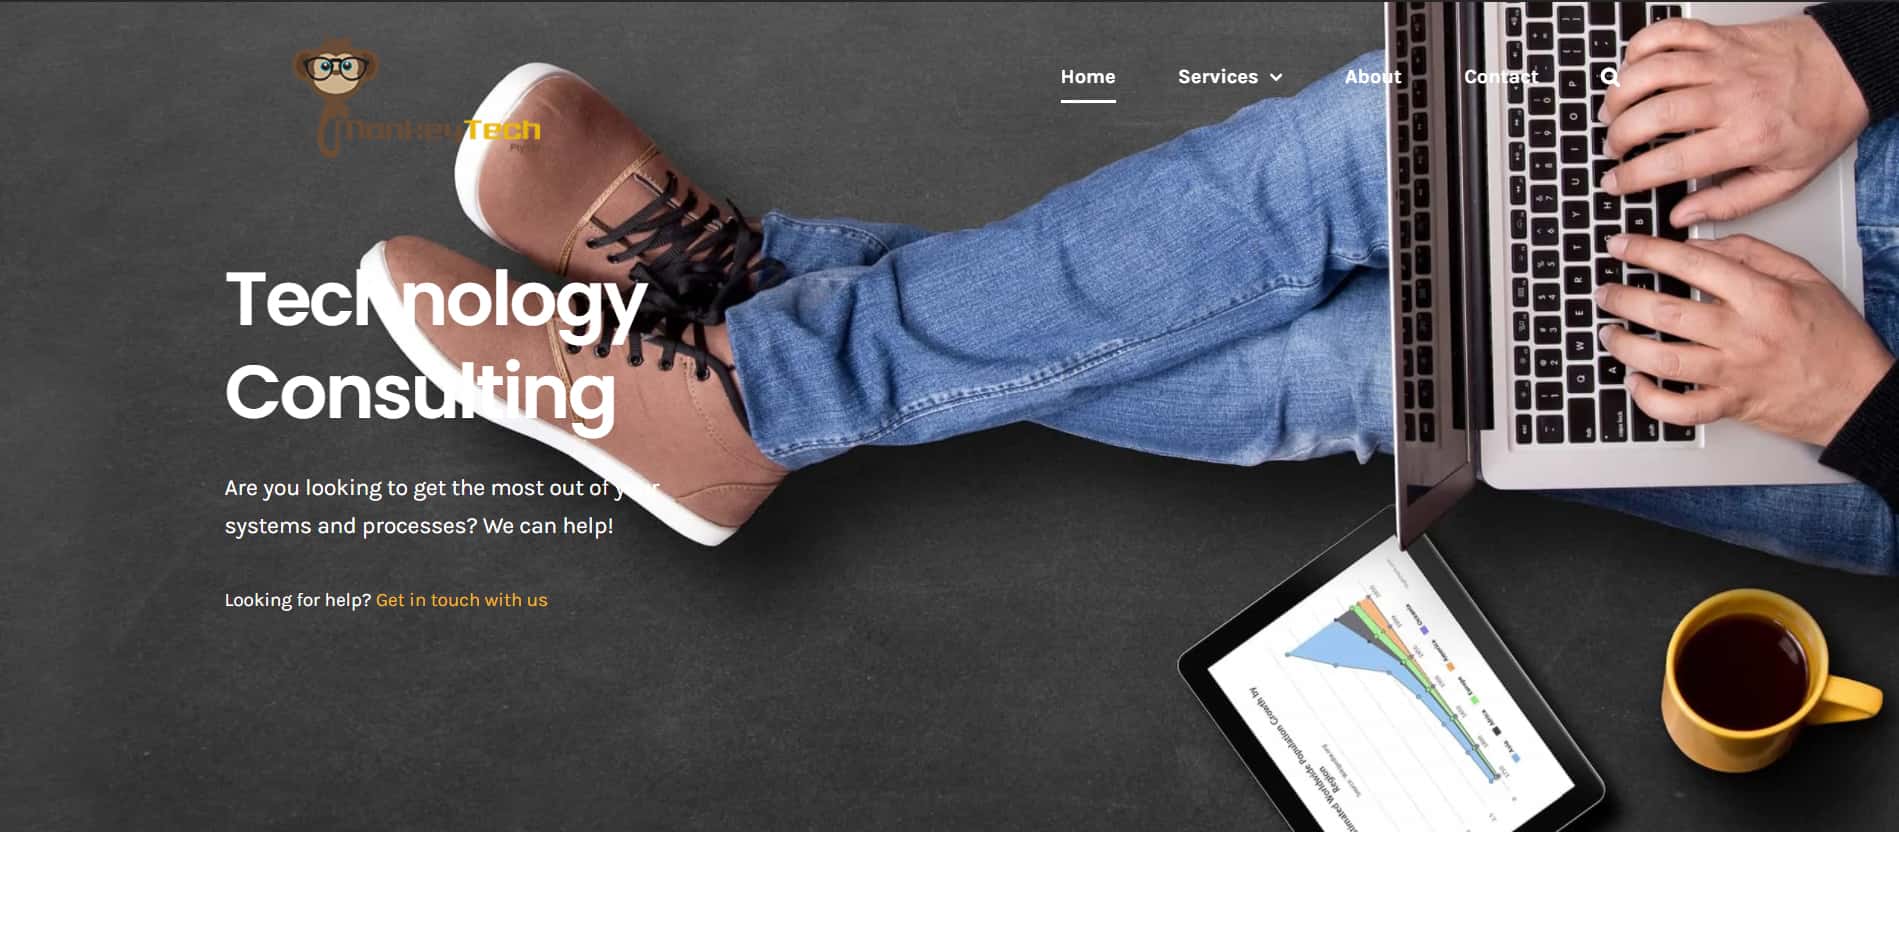 Home page of Monkey Tech's website